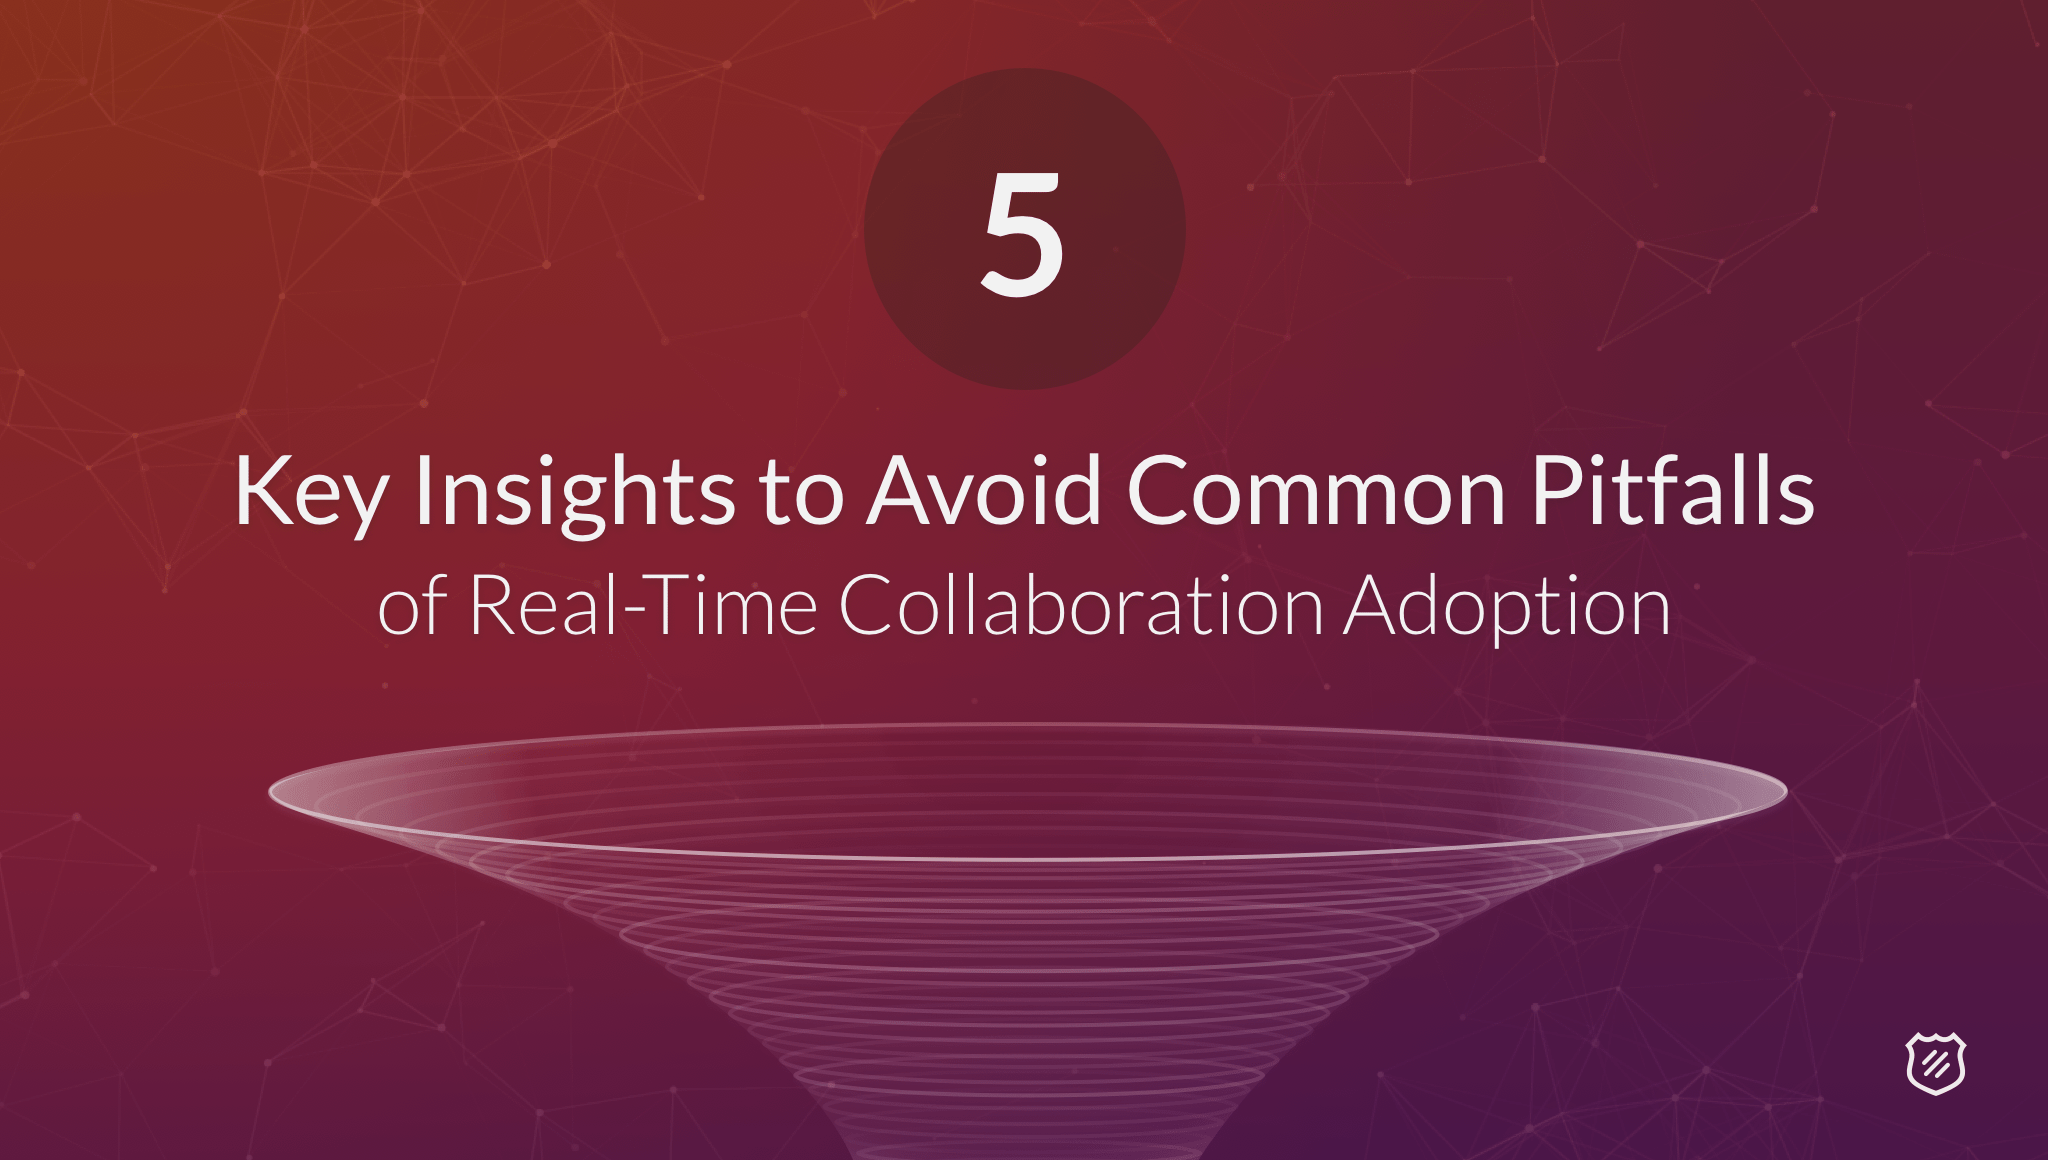 5 Key Insights to Avoid Common Pitfalls of Real-Time Collaboration Adoption